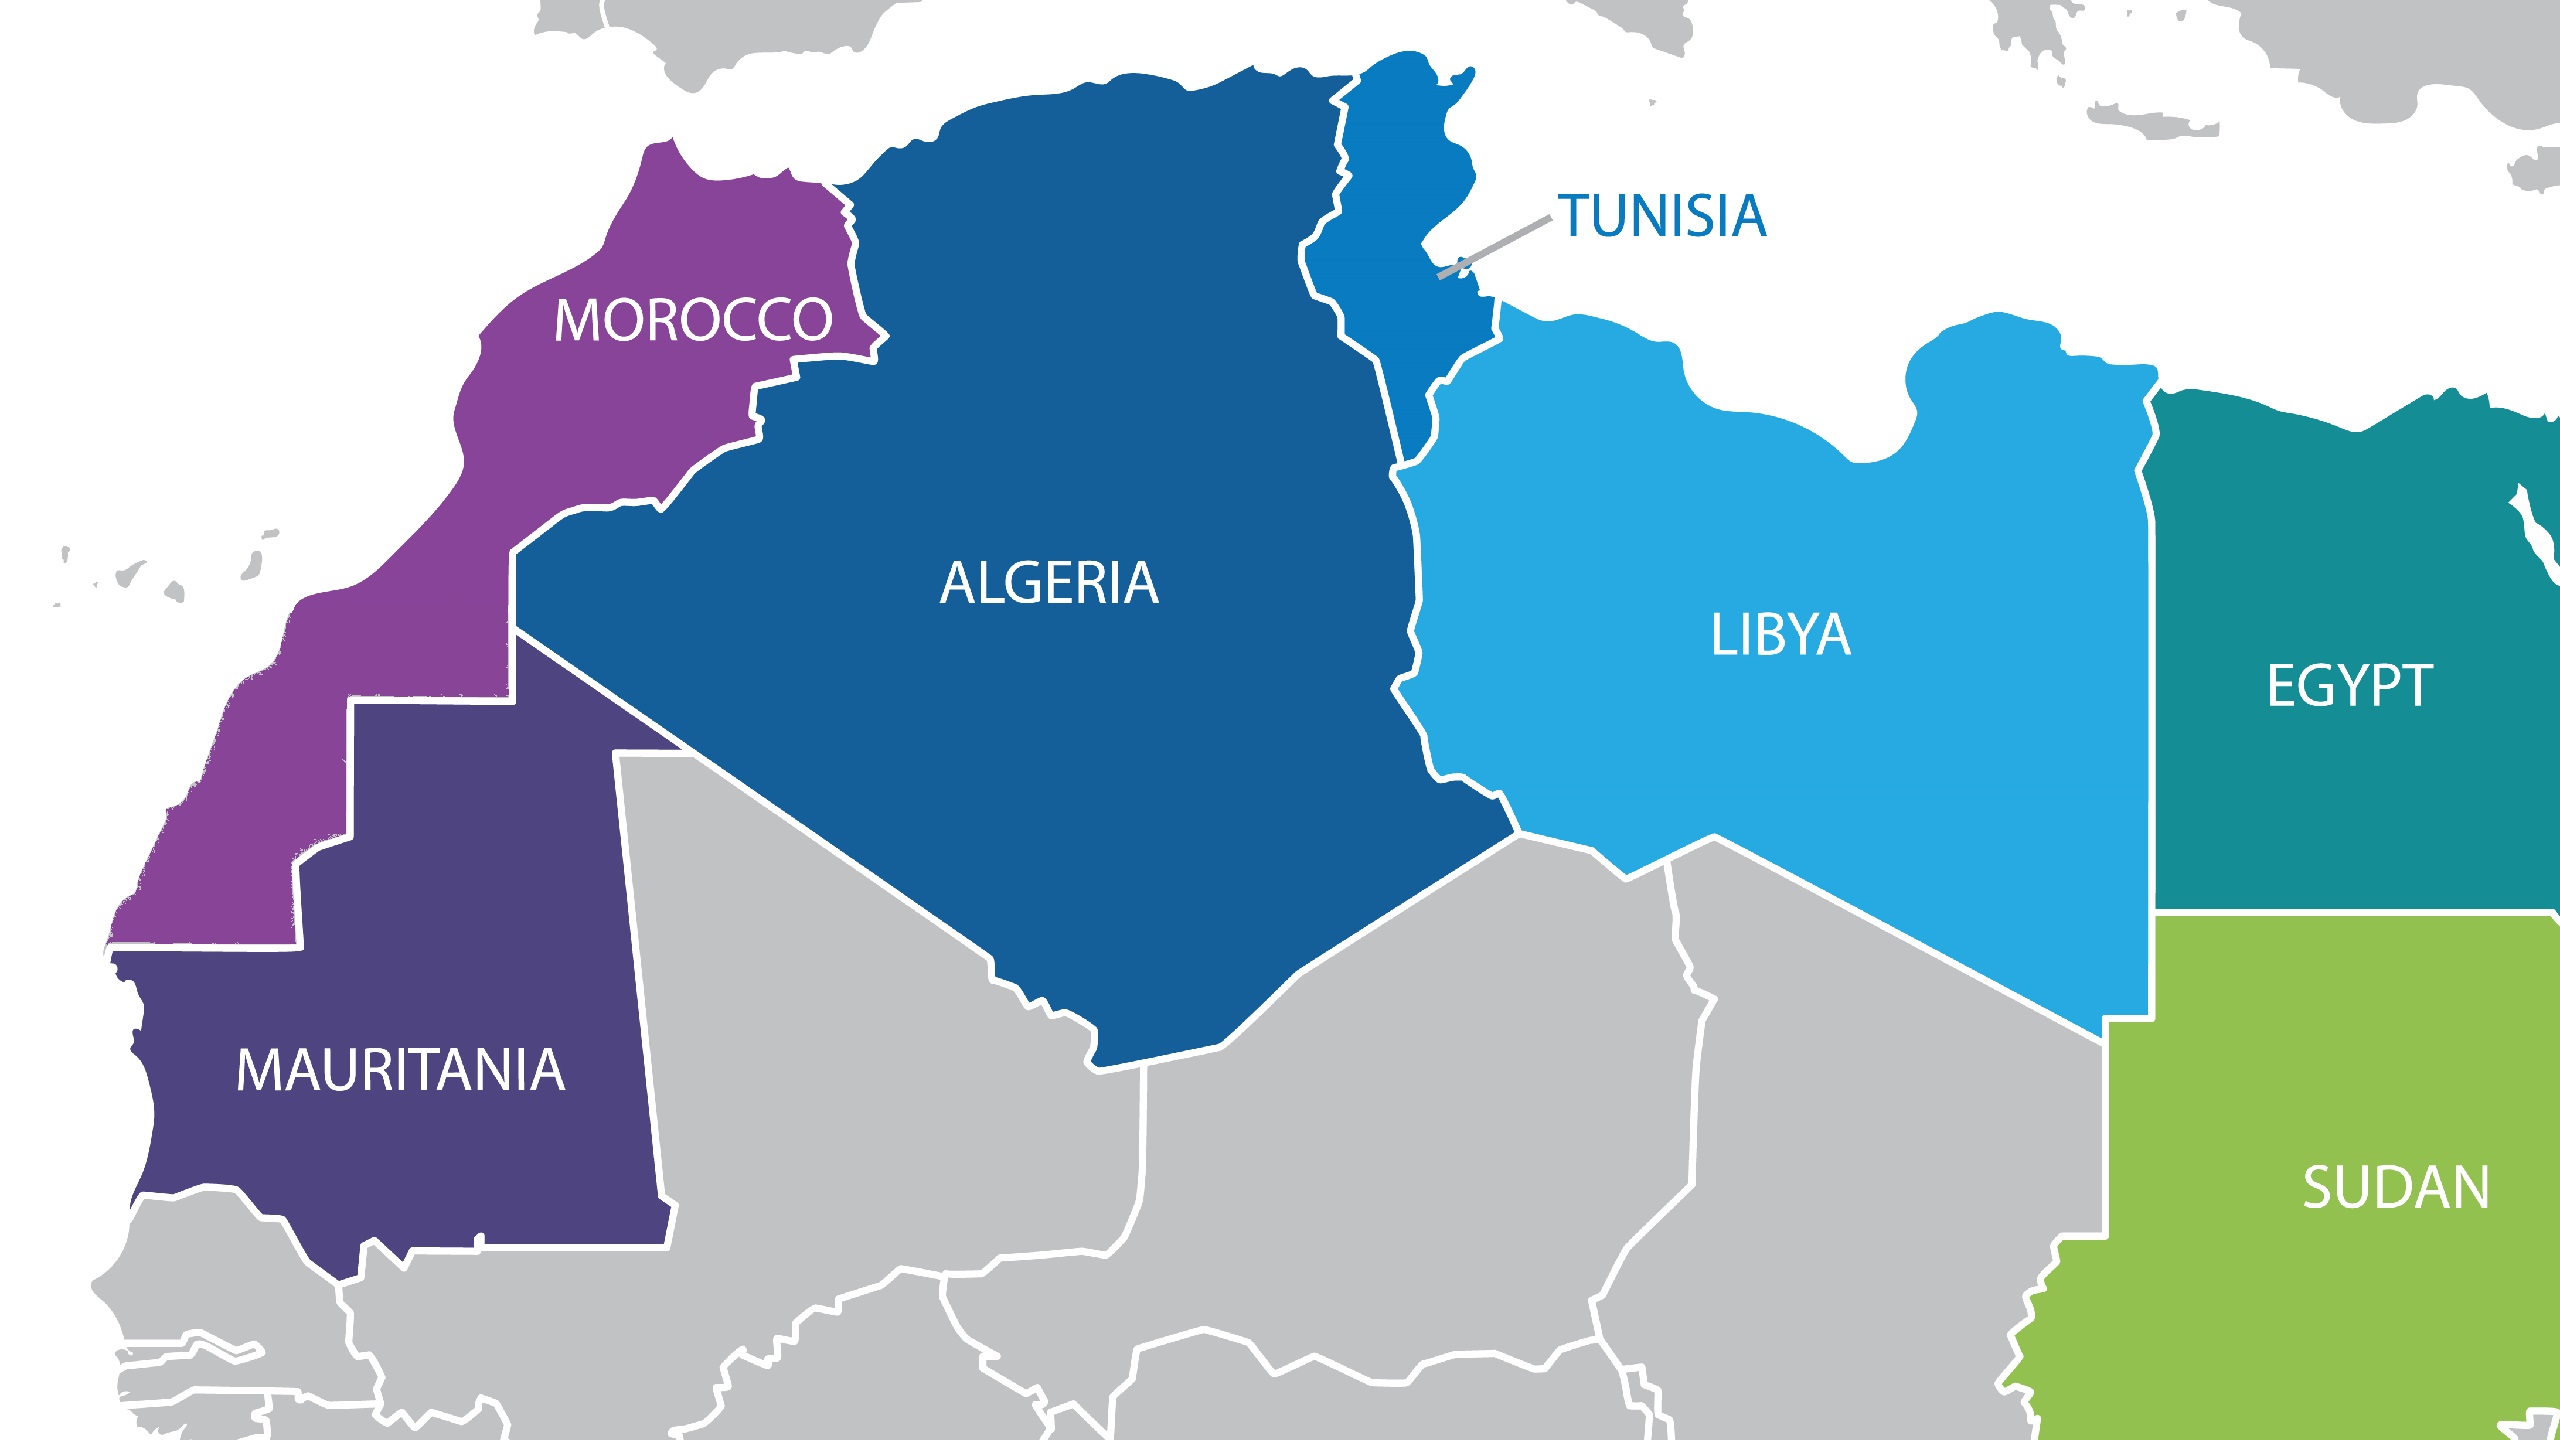 Algeria Angry After Arab League Endorses Moroccan Map Including Western Sahara